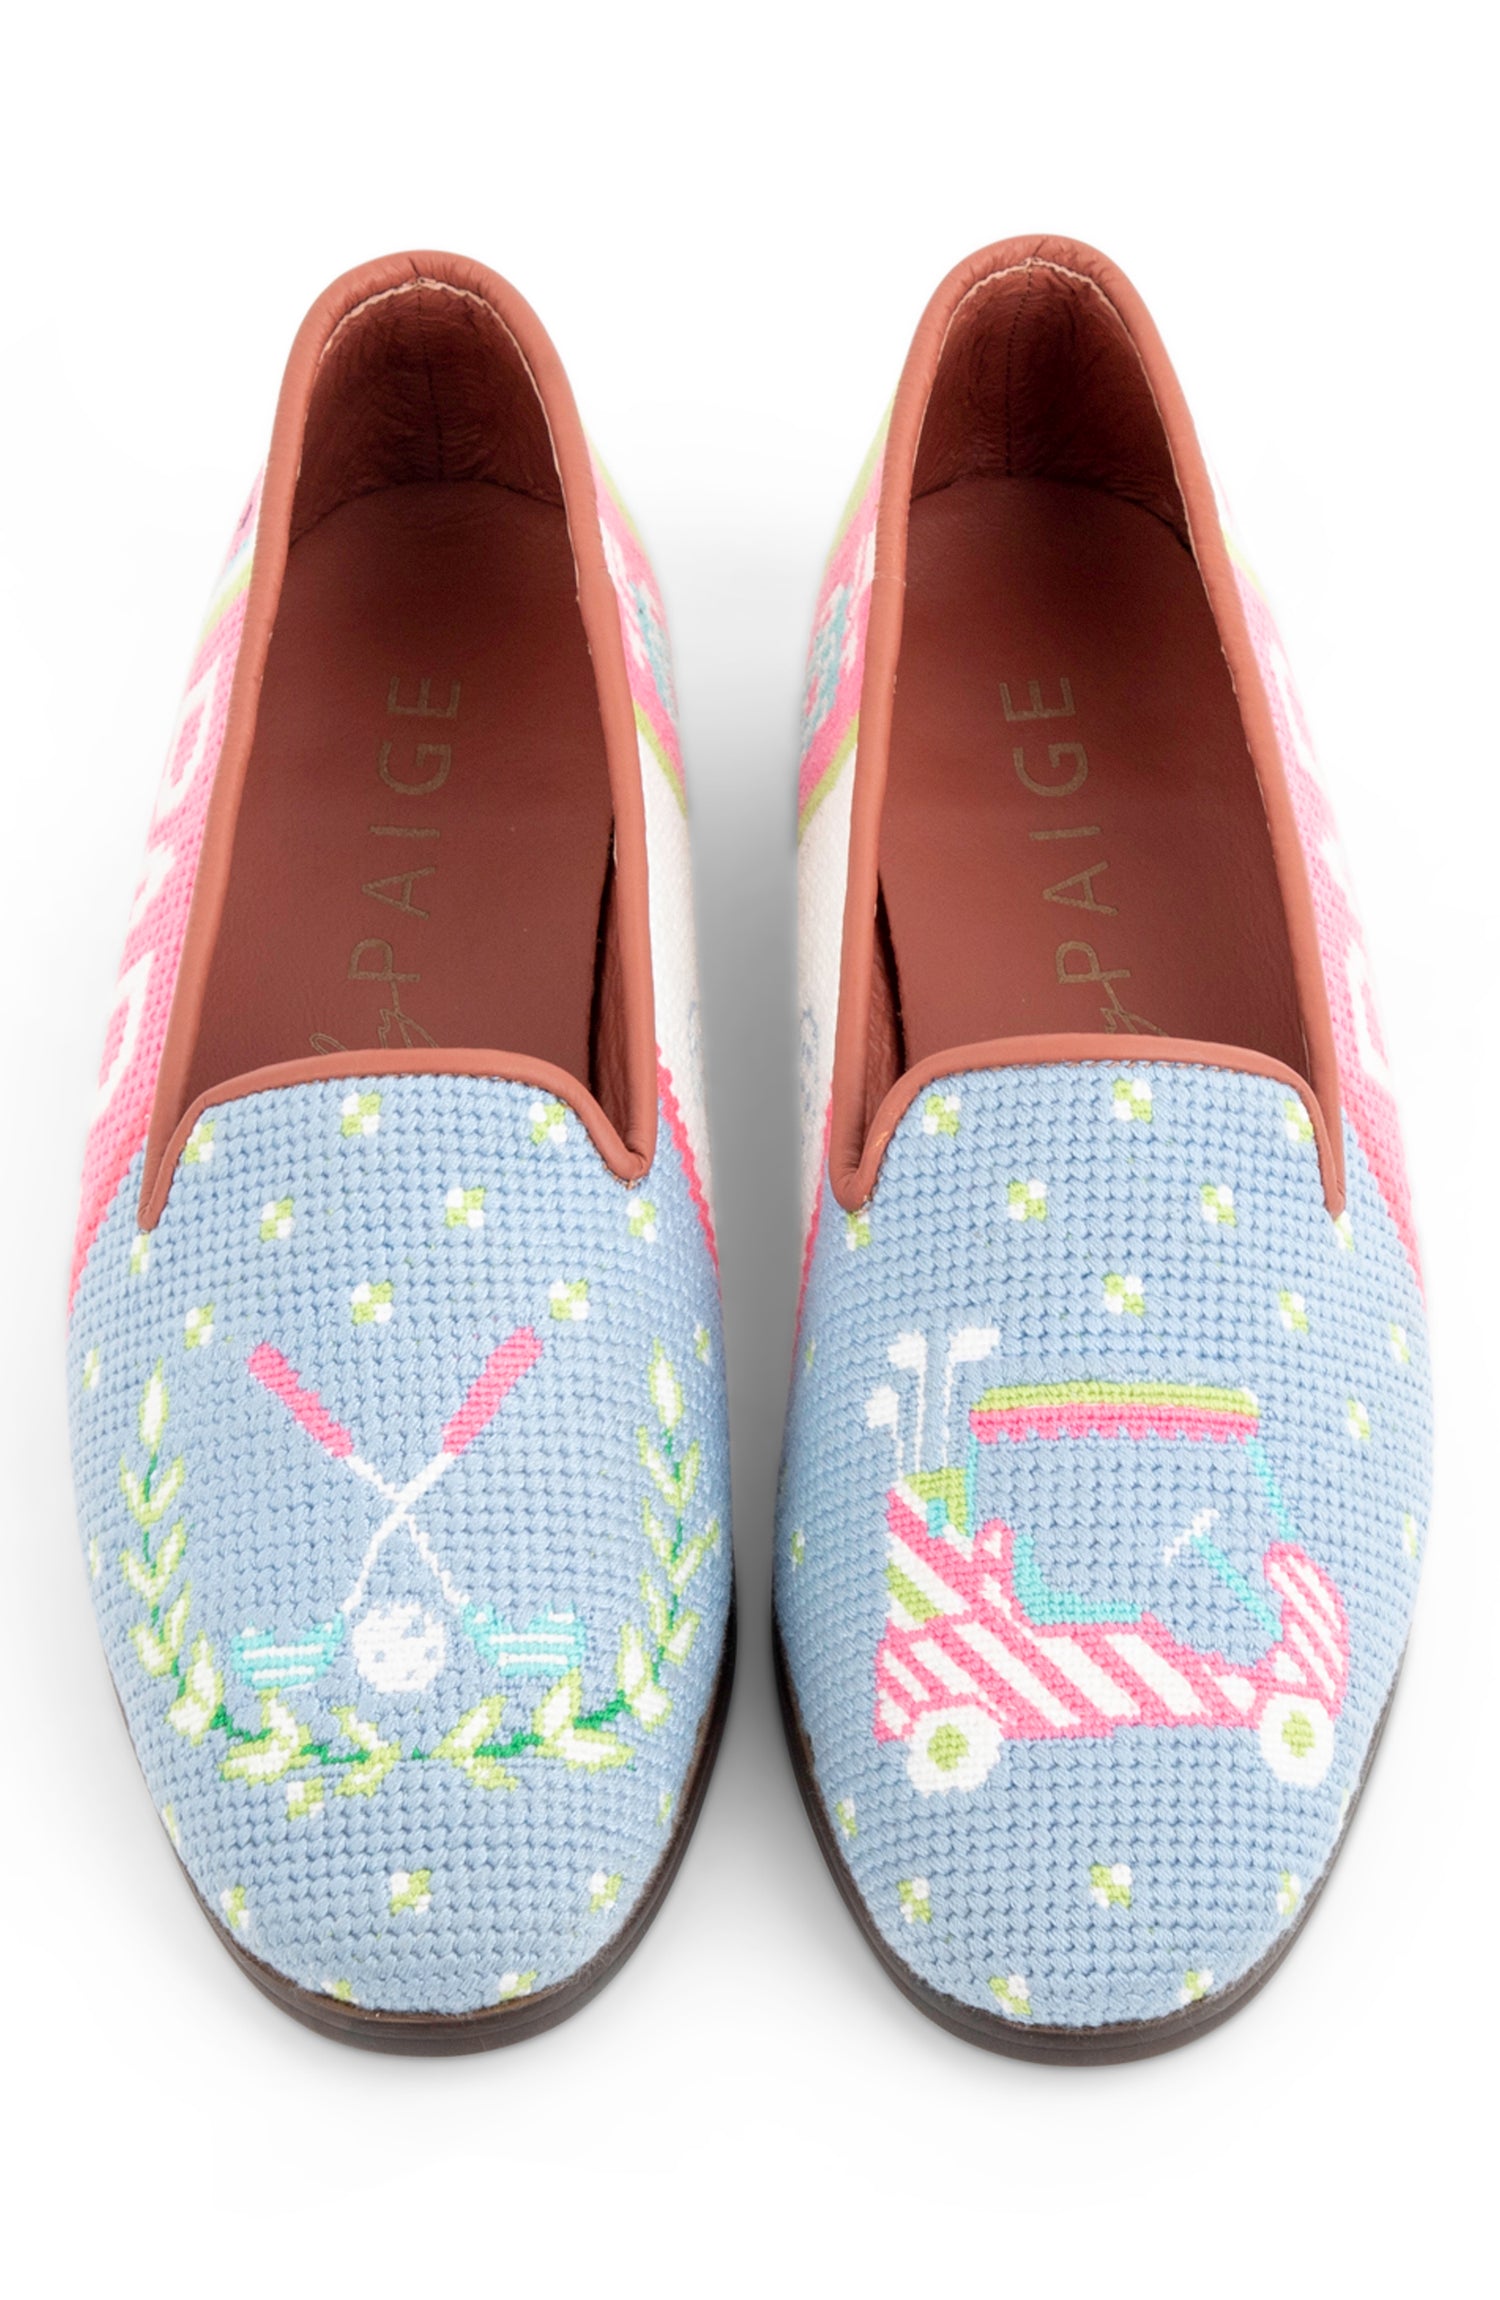 Needlepoint Loafer in Golf